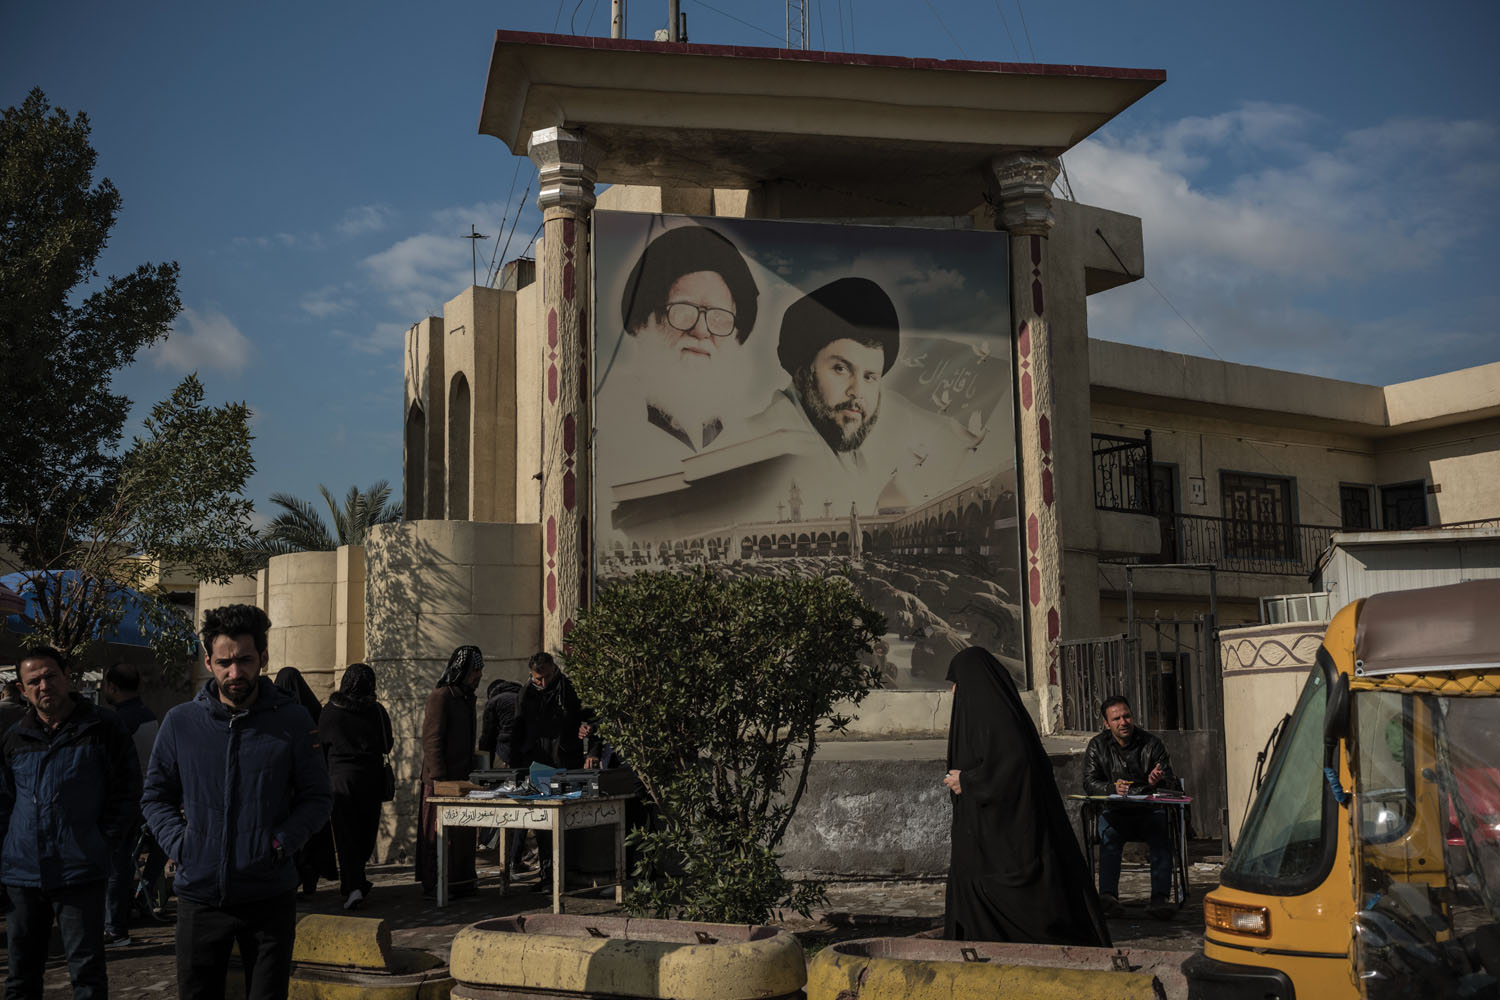 A billboard of Shia cleric Muqtada al-Sadr and his late father, Mohammed Sadeq al-Sadr, in Baghdad’s largest slum, Sadr City. Muqtada al-Sadr was an early supporter of the protesters, but his position has been inconsistent; many speculate that his recent critiques of the movement are the result of Iranian financial backing.